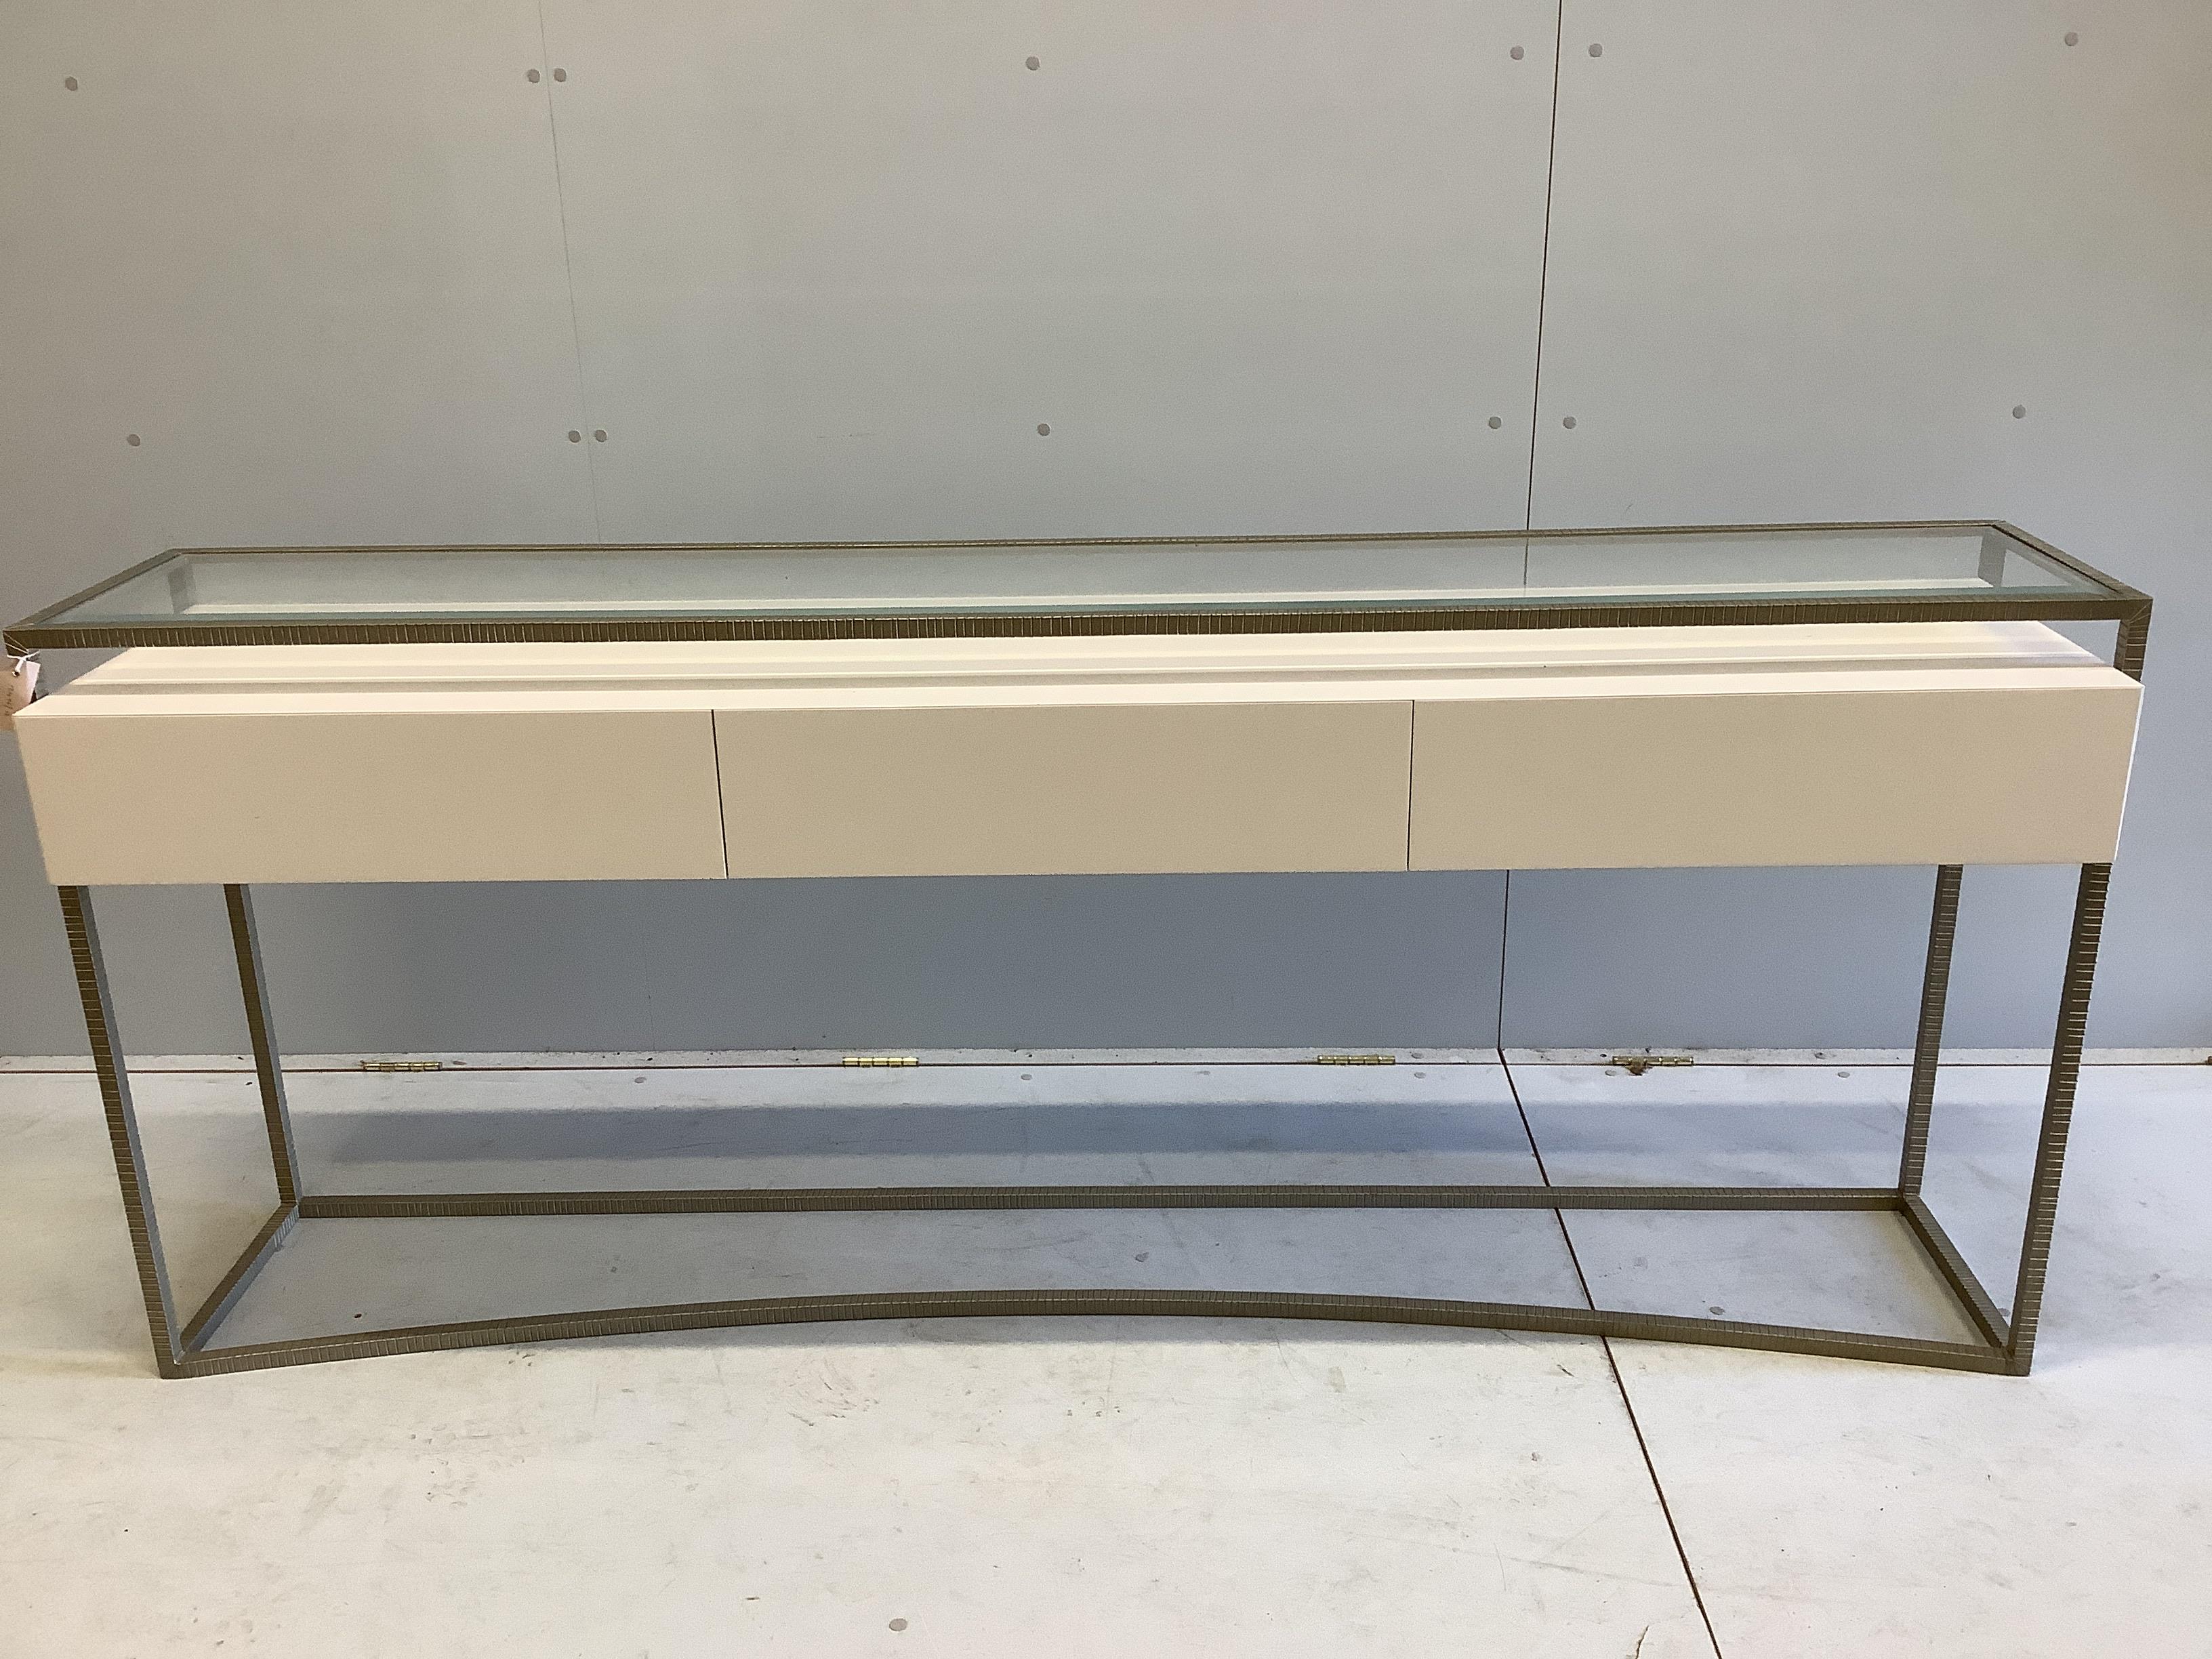 A Decorus console table with three drawers, width 200cm, depth 40cm, height 84cm